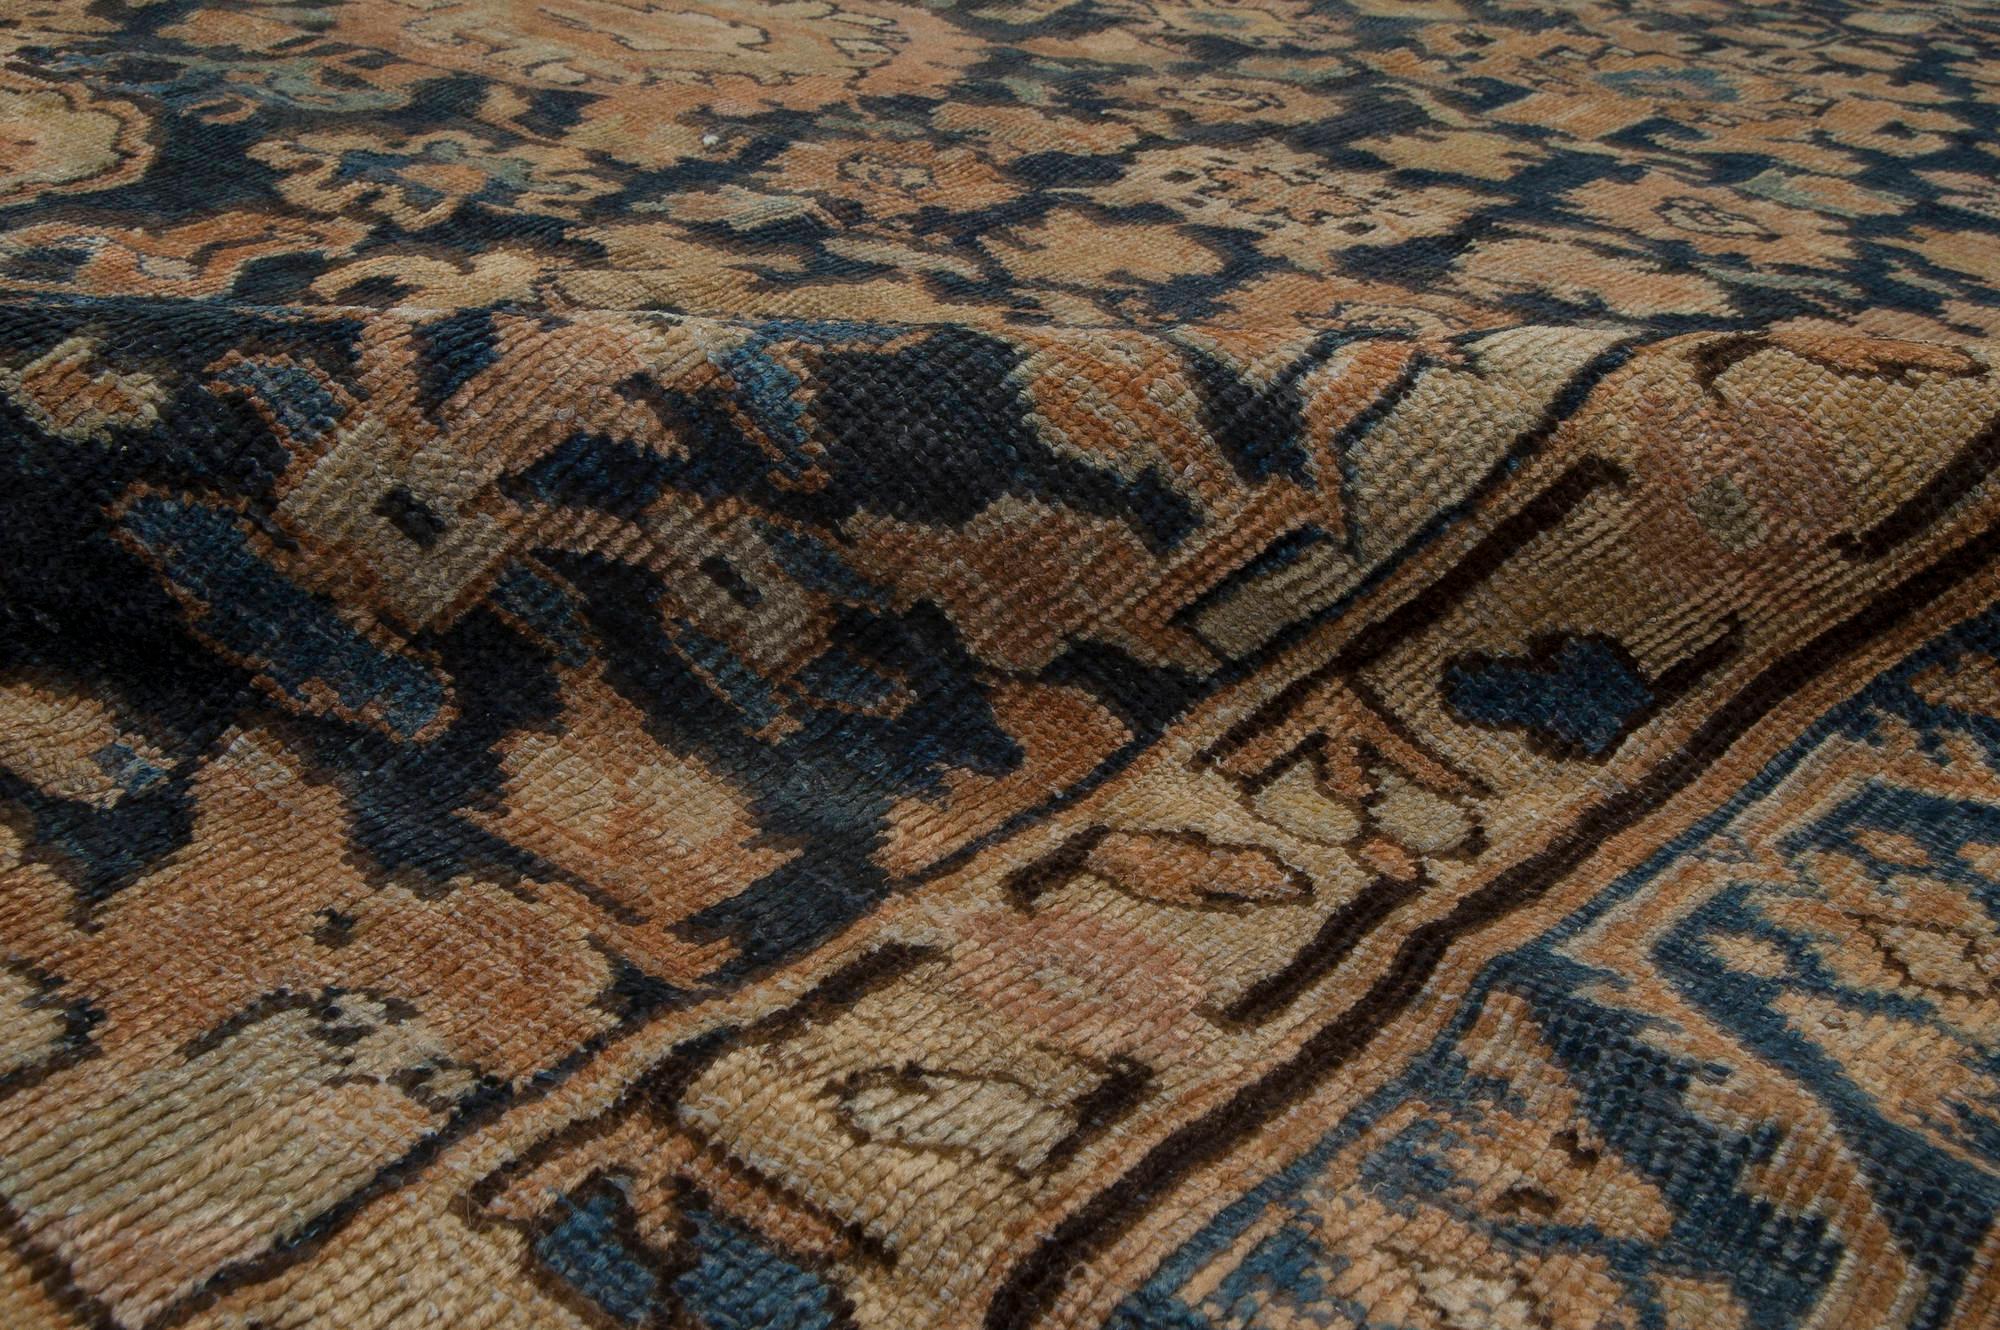 19th Century Persian Sultanabad Blue, Brown Handmade Wool Rug
Size: 13'6